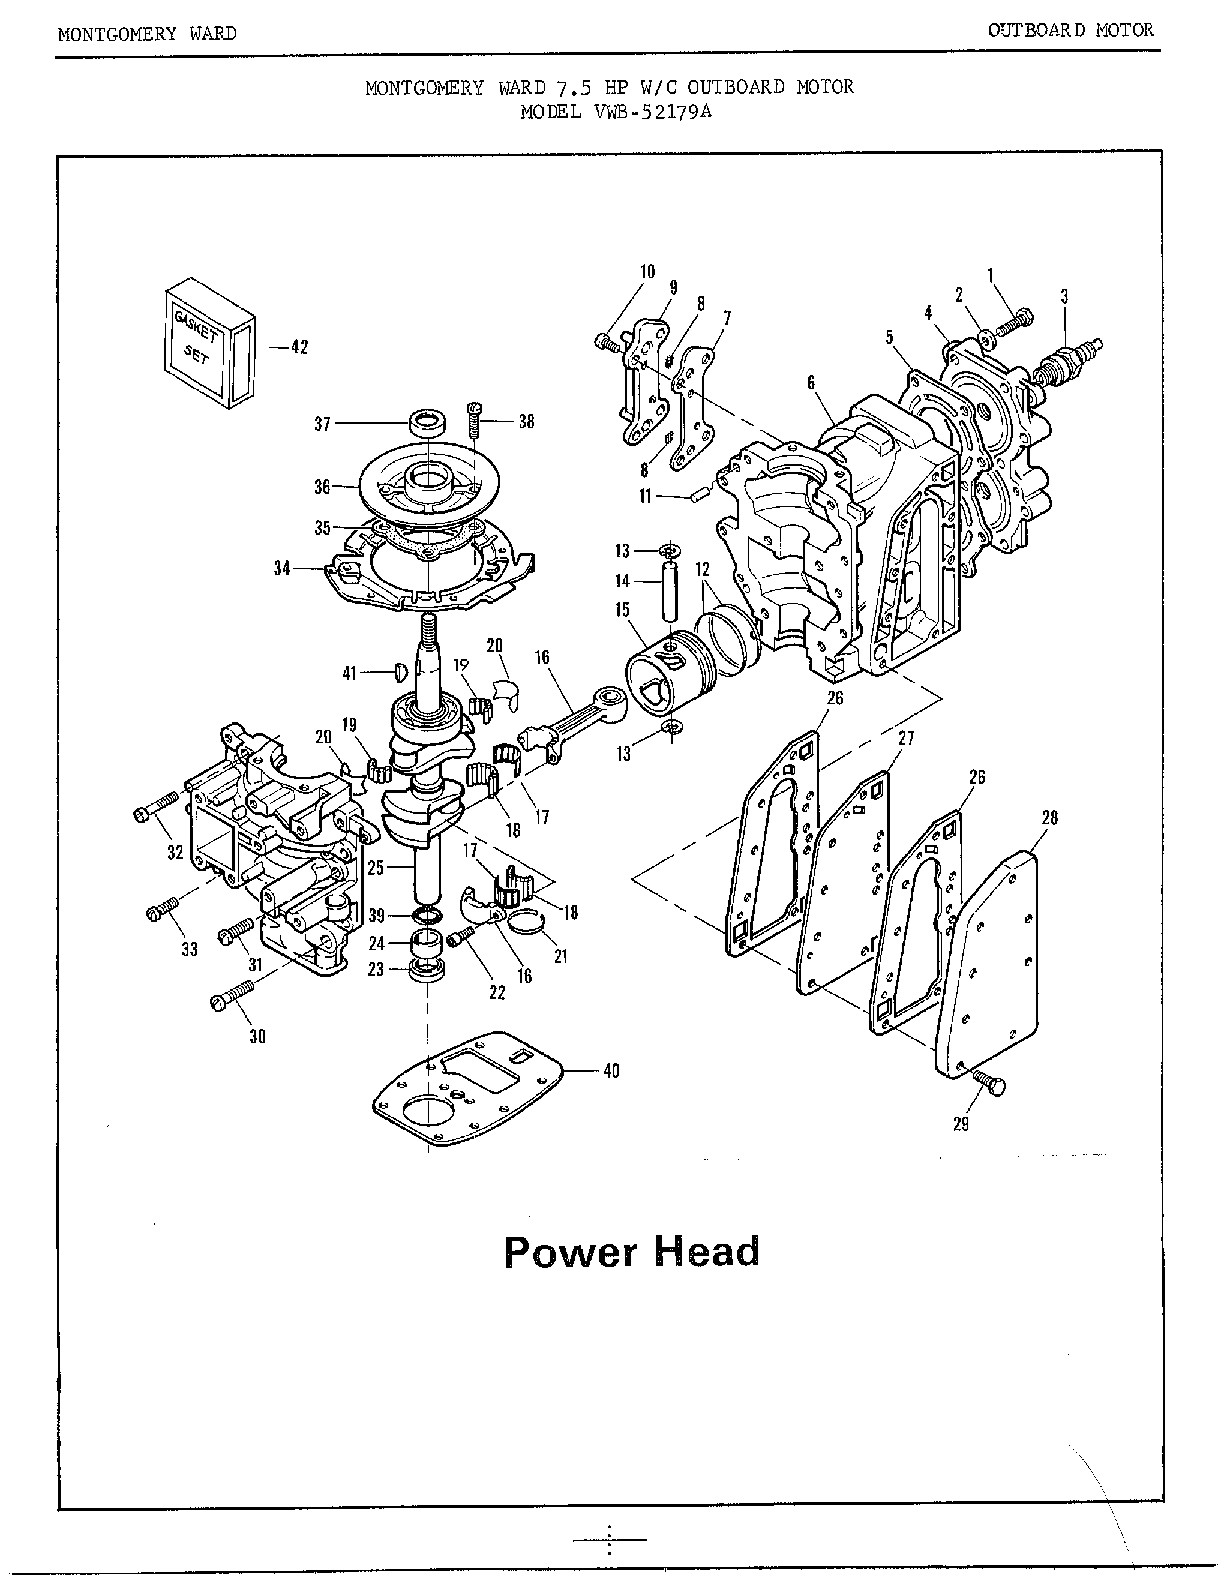 7 5hp Outboard Motor  Power Head Diagram  U0026 Parts List For